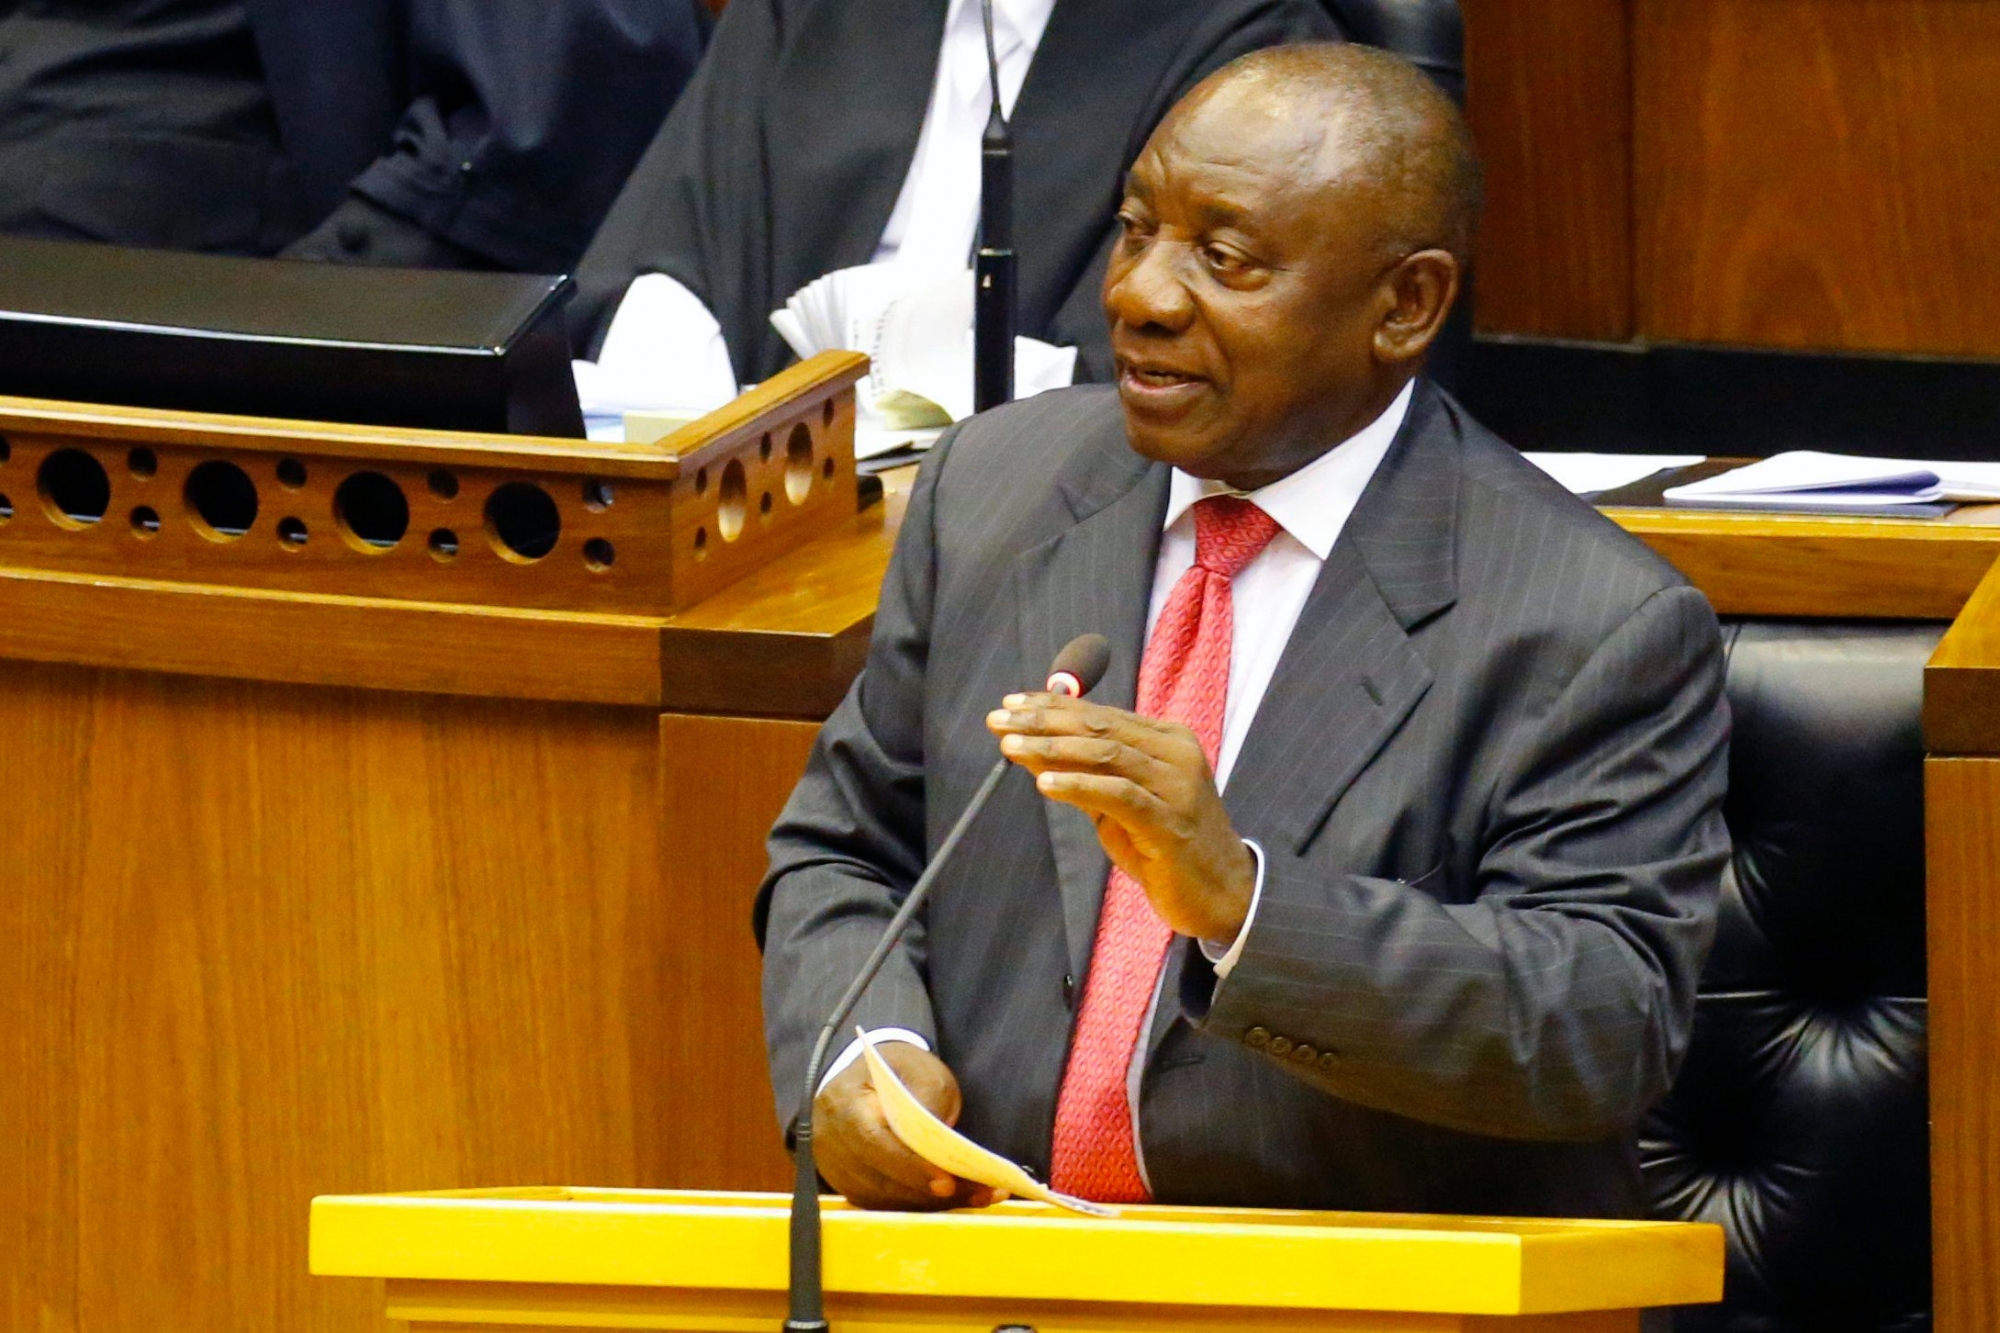 epa06528486 Newly elected President of South Africa Cyril Ramaphosa addresses Parliament during an extraordinary sitting after the resignation of President Jacob Zuma, Cape Town, South Africa, 15 February 2018. Acting President, Cyril Ramaphosa will be sworn in during the sitting. President Zuma's resignation overnight comes after he was under intense pressure to resign amidst ongoing corruption and state capture allegations.  EPA/MIKE HUTCHINGS / POOL SOUTH AFRICA ACTING PRESIDENT CYRIL RAMAPHOSA